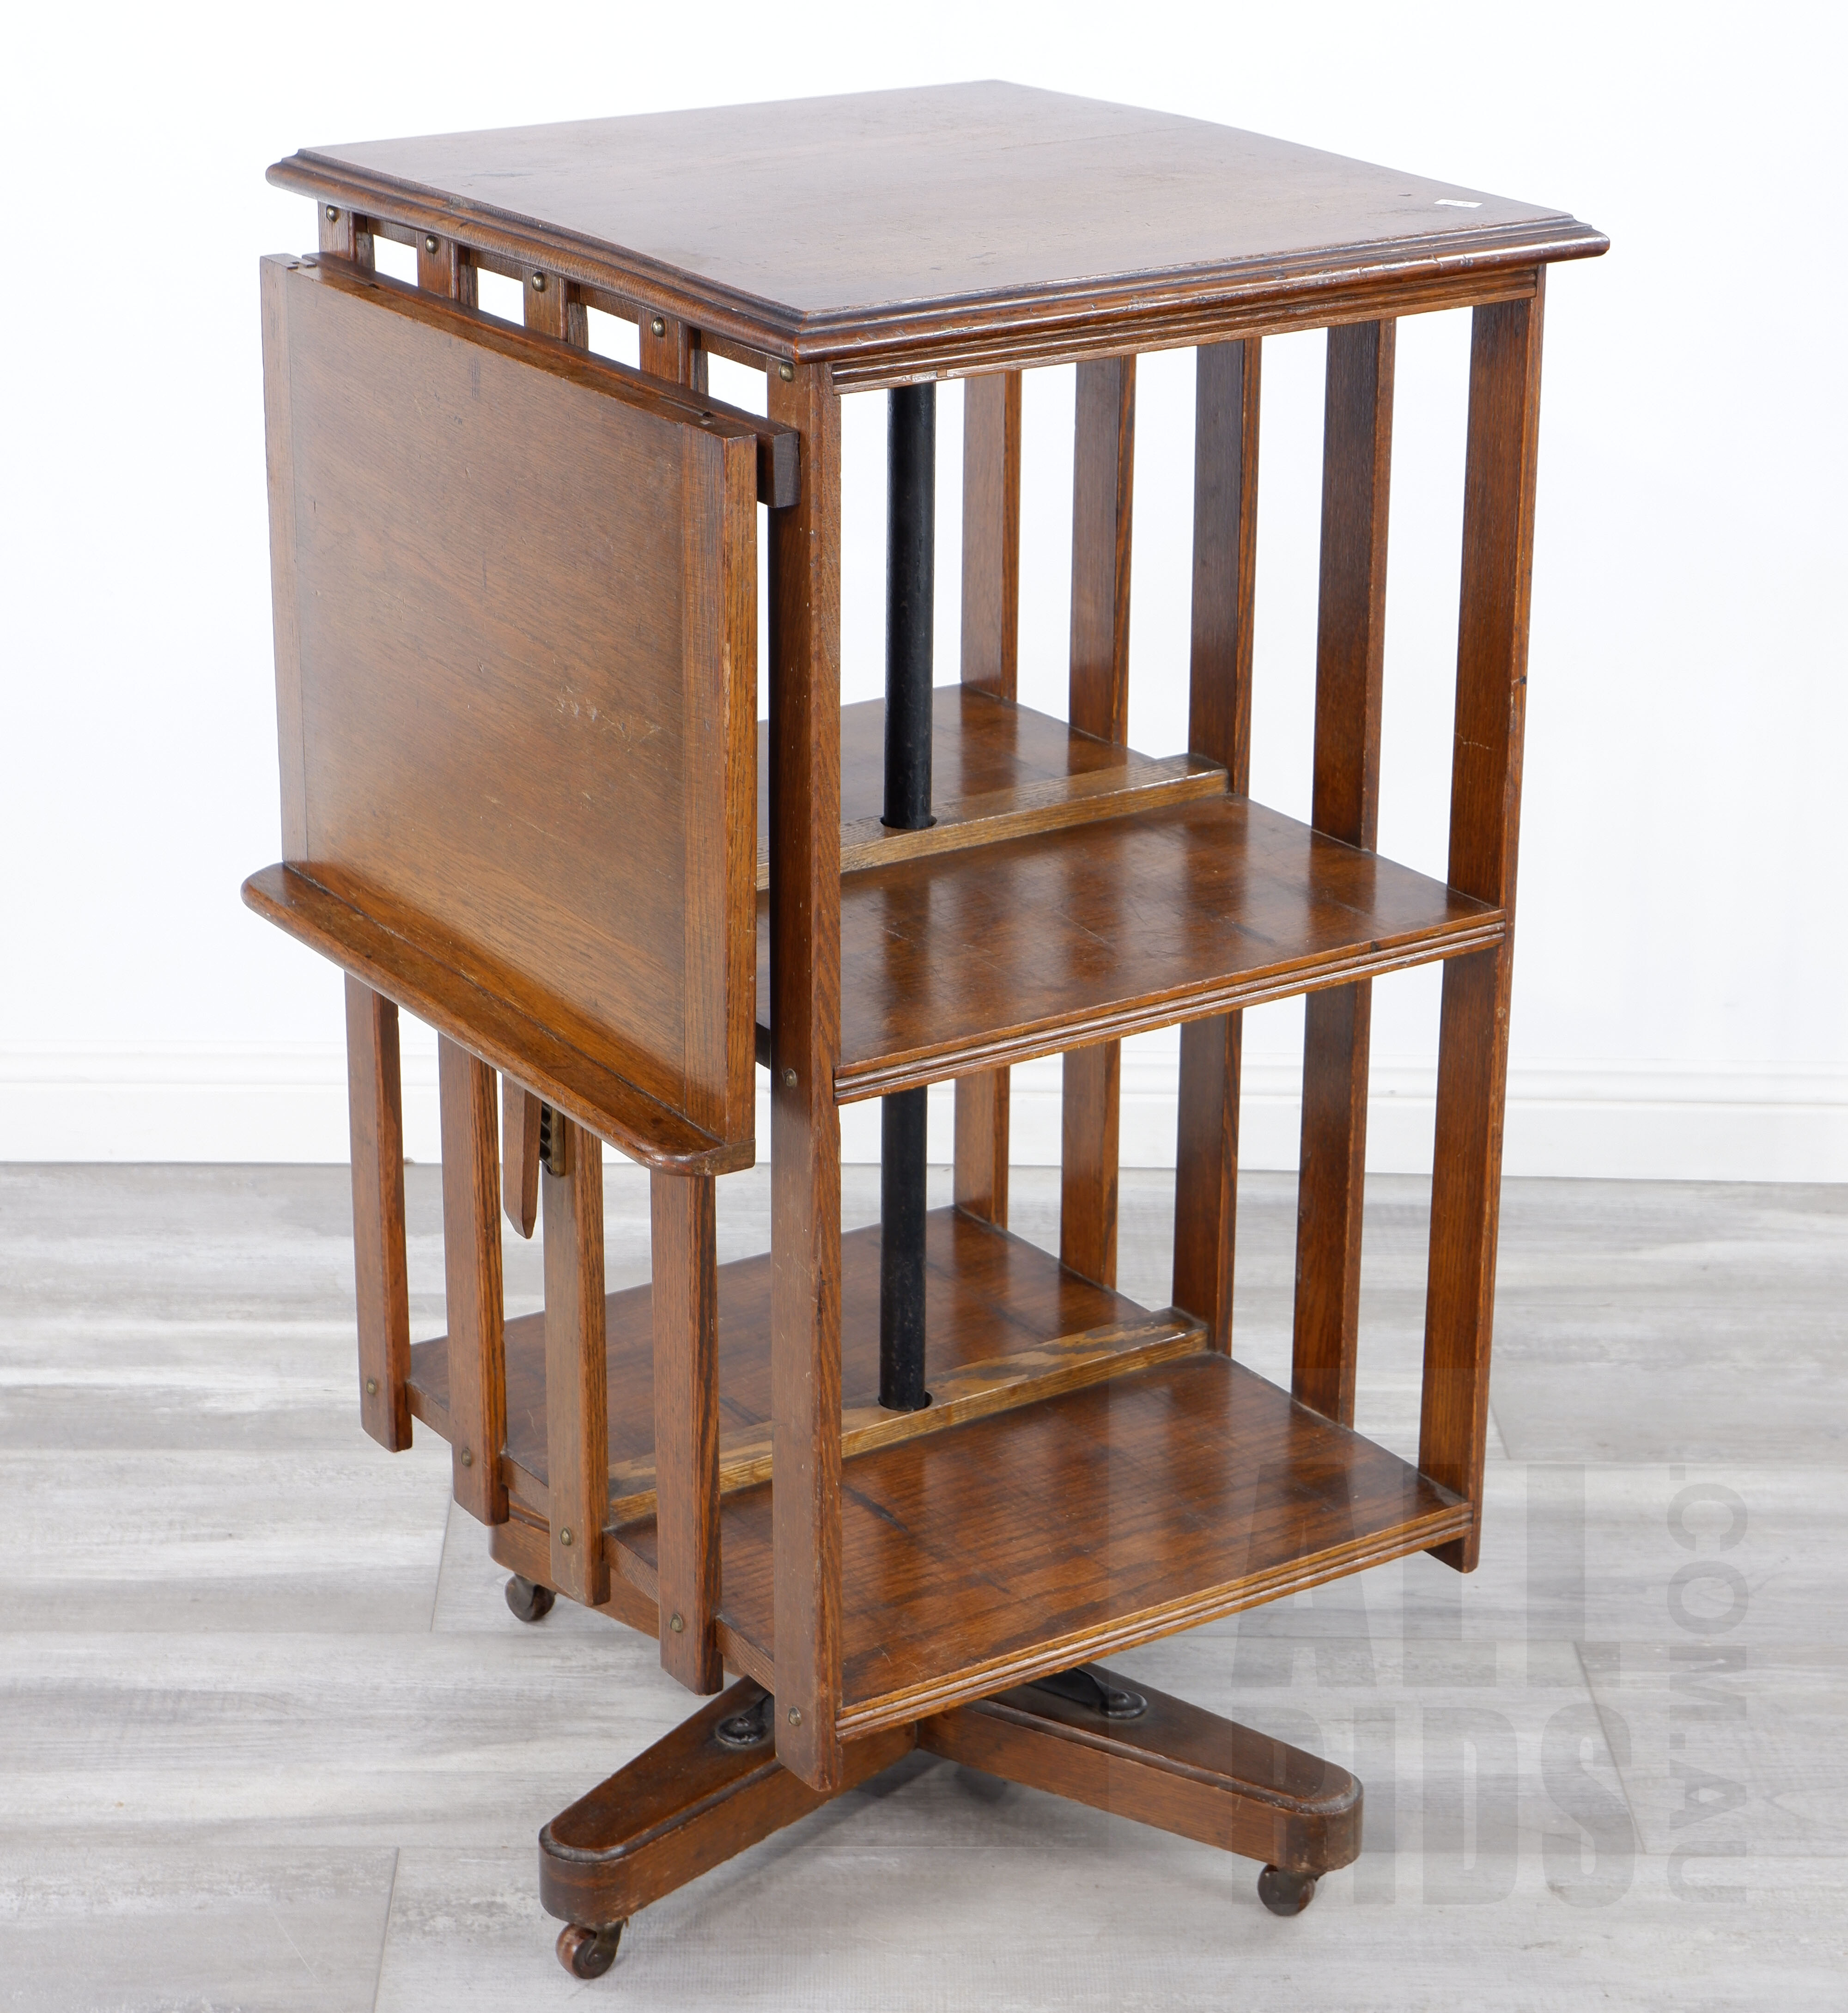 'Good Edwardian Oak Revolving Bookcase with Folding Lecture Stand'